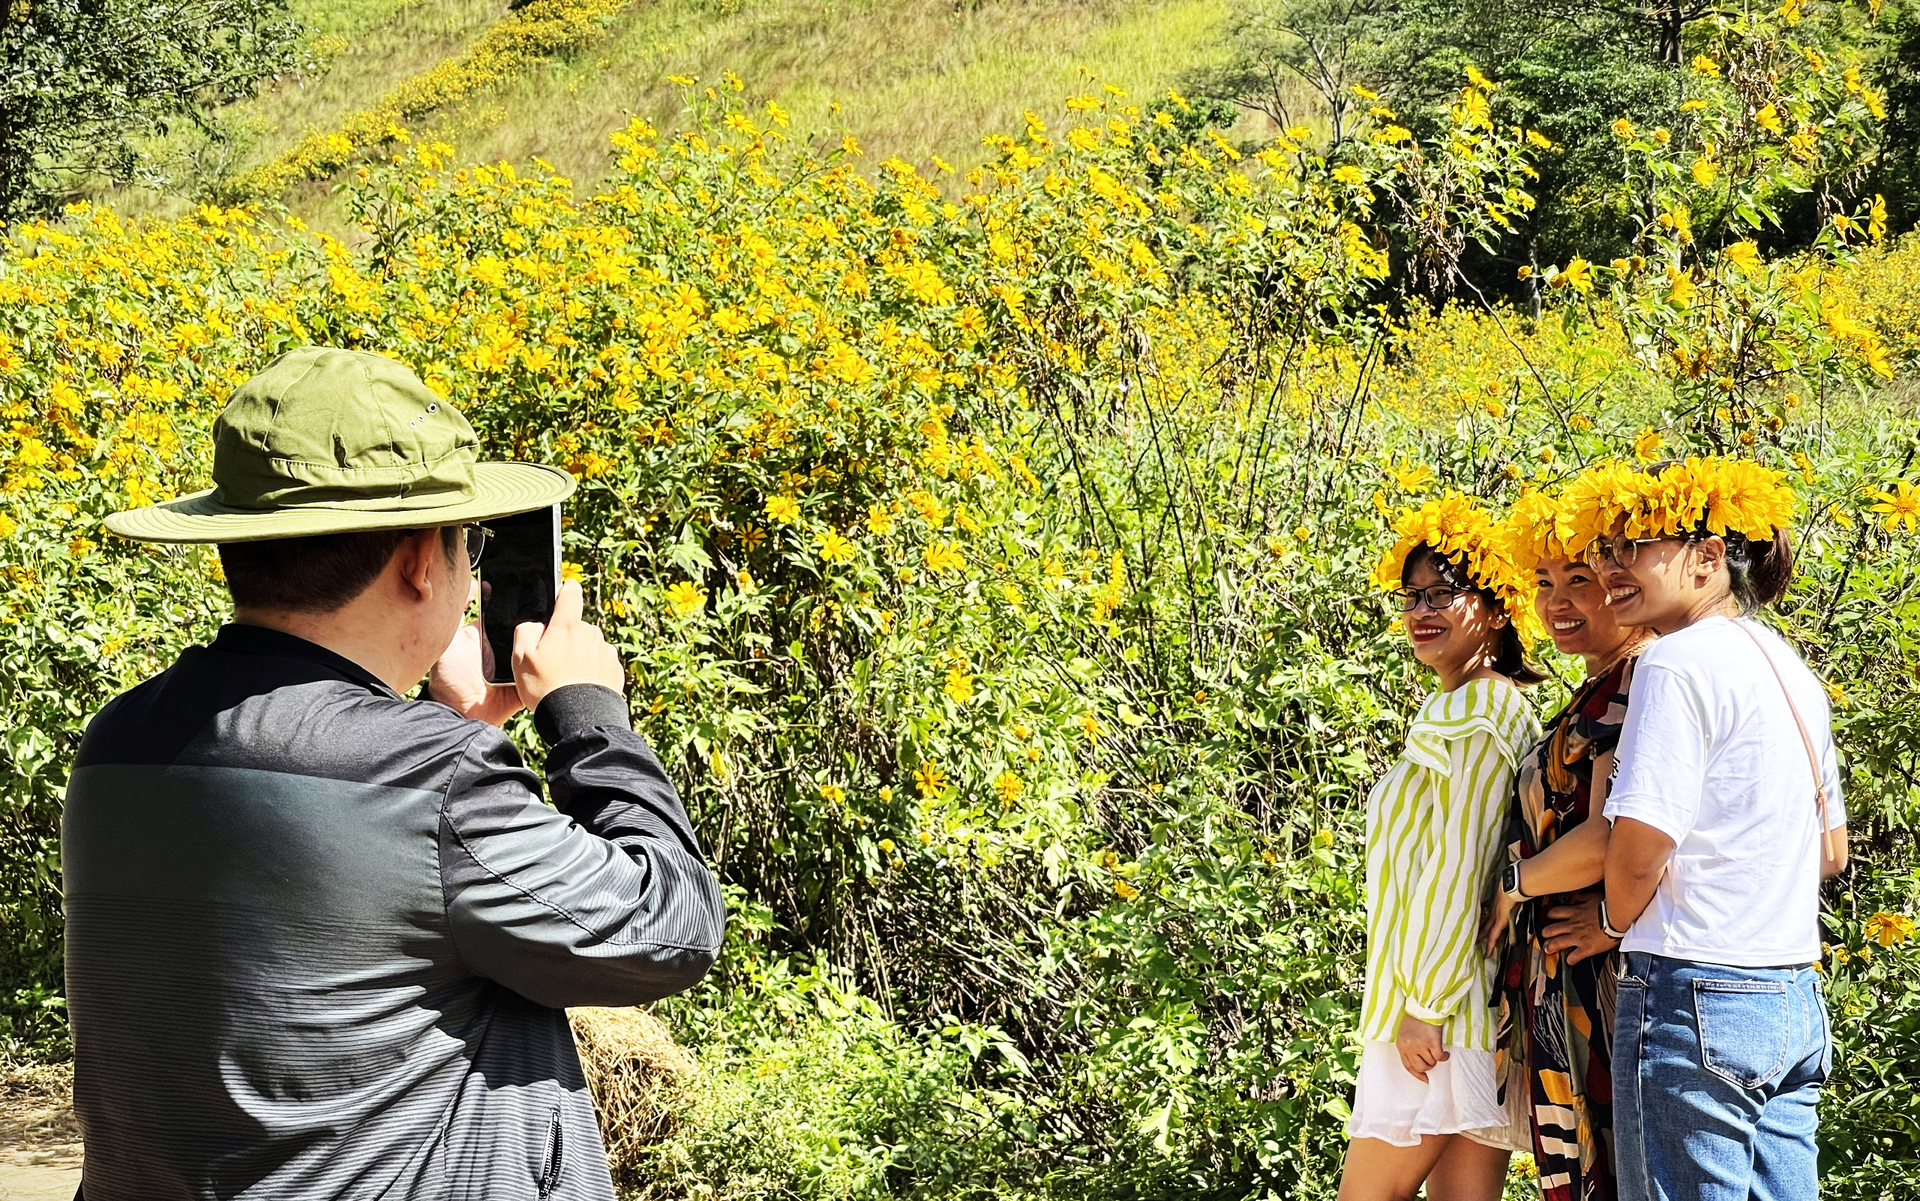 The Chu Dang Ya Wild Sunflower – Volcano Festival 2023 attracts a large number of tourists seeking travel and unique experiences.